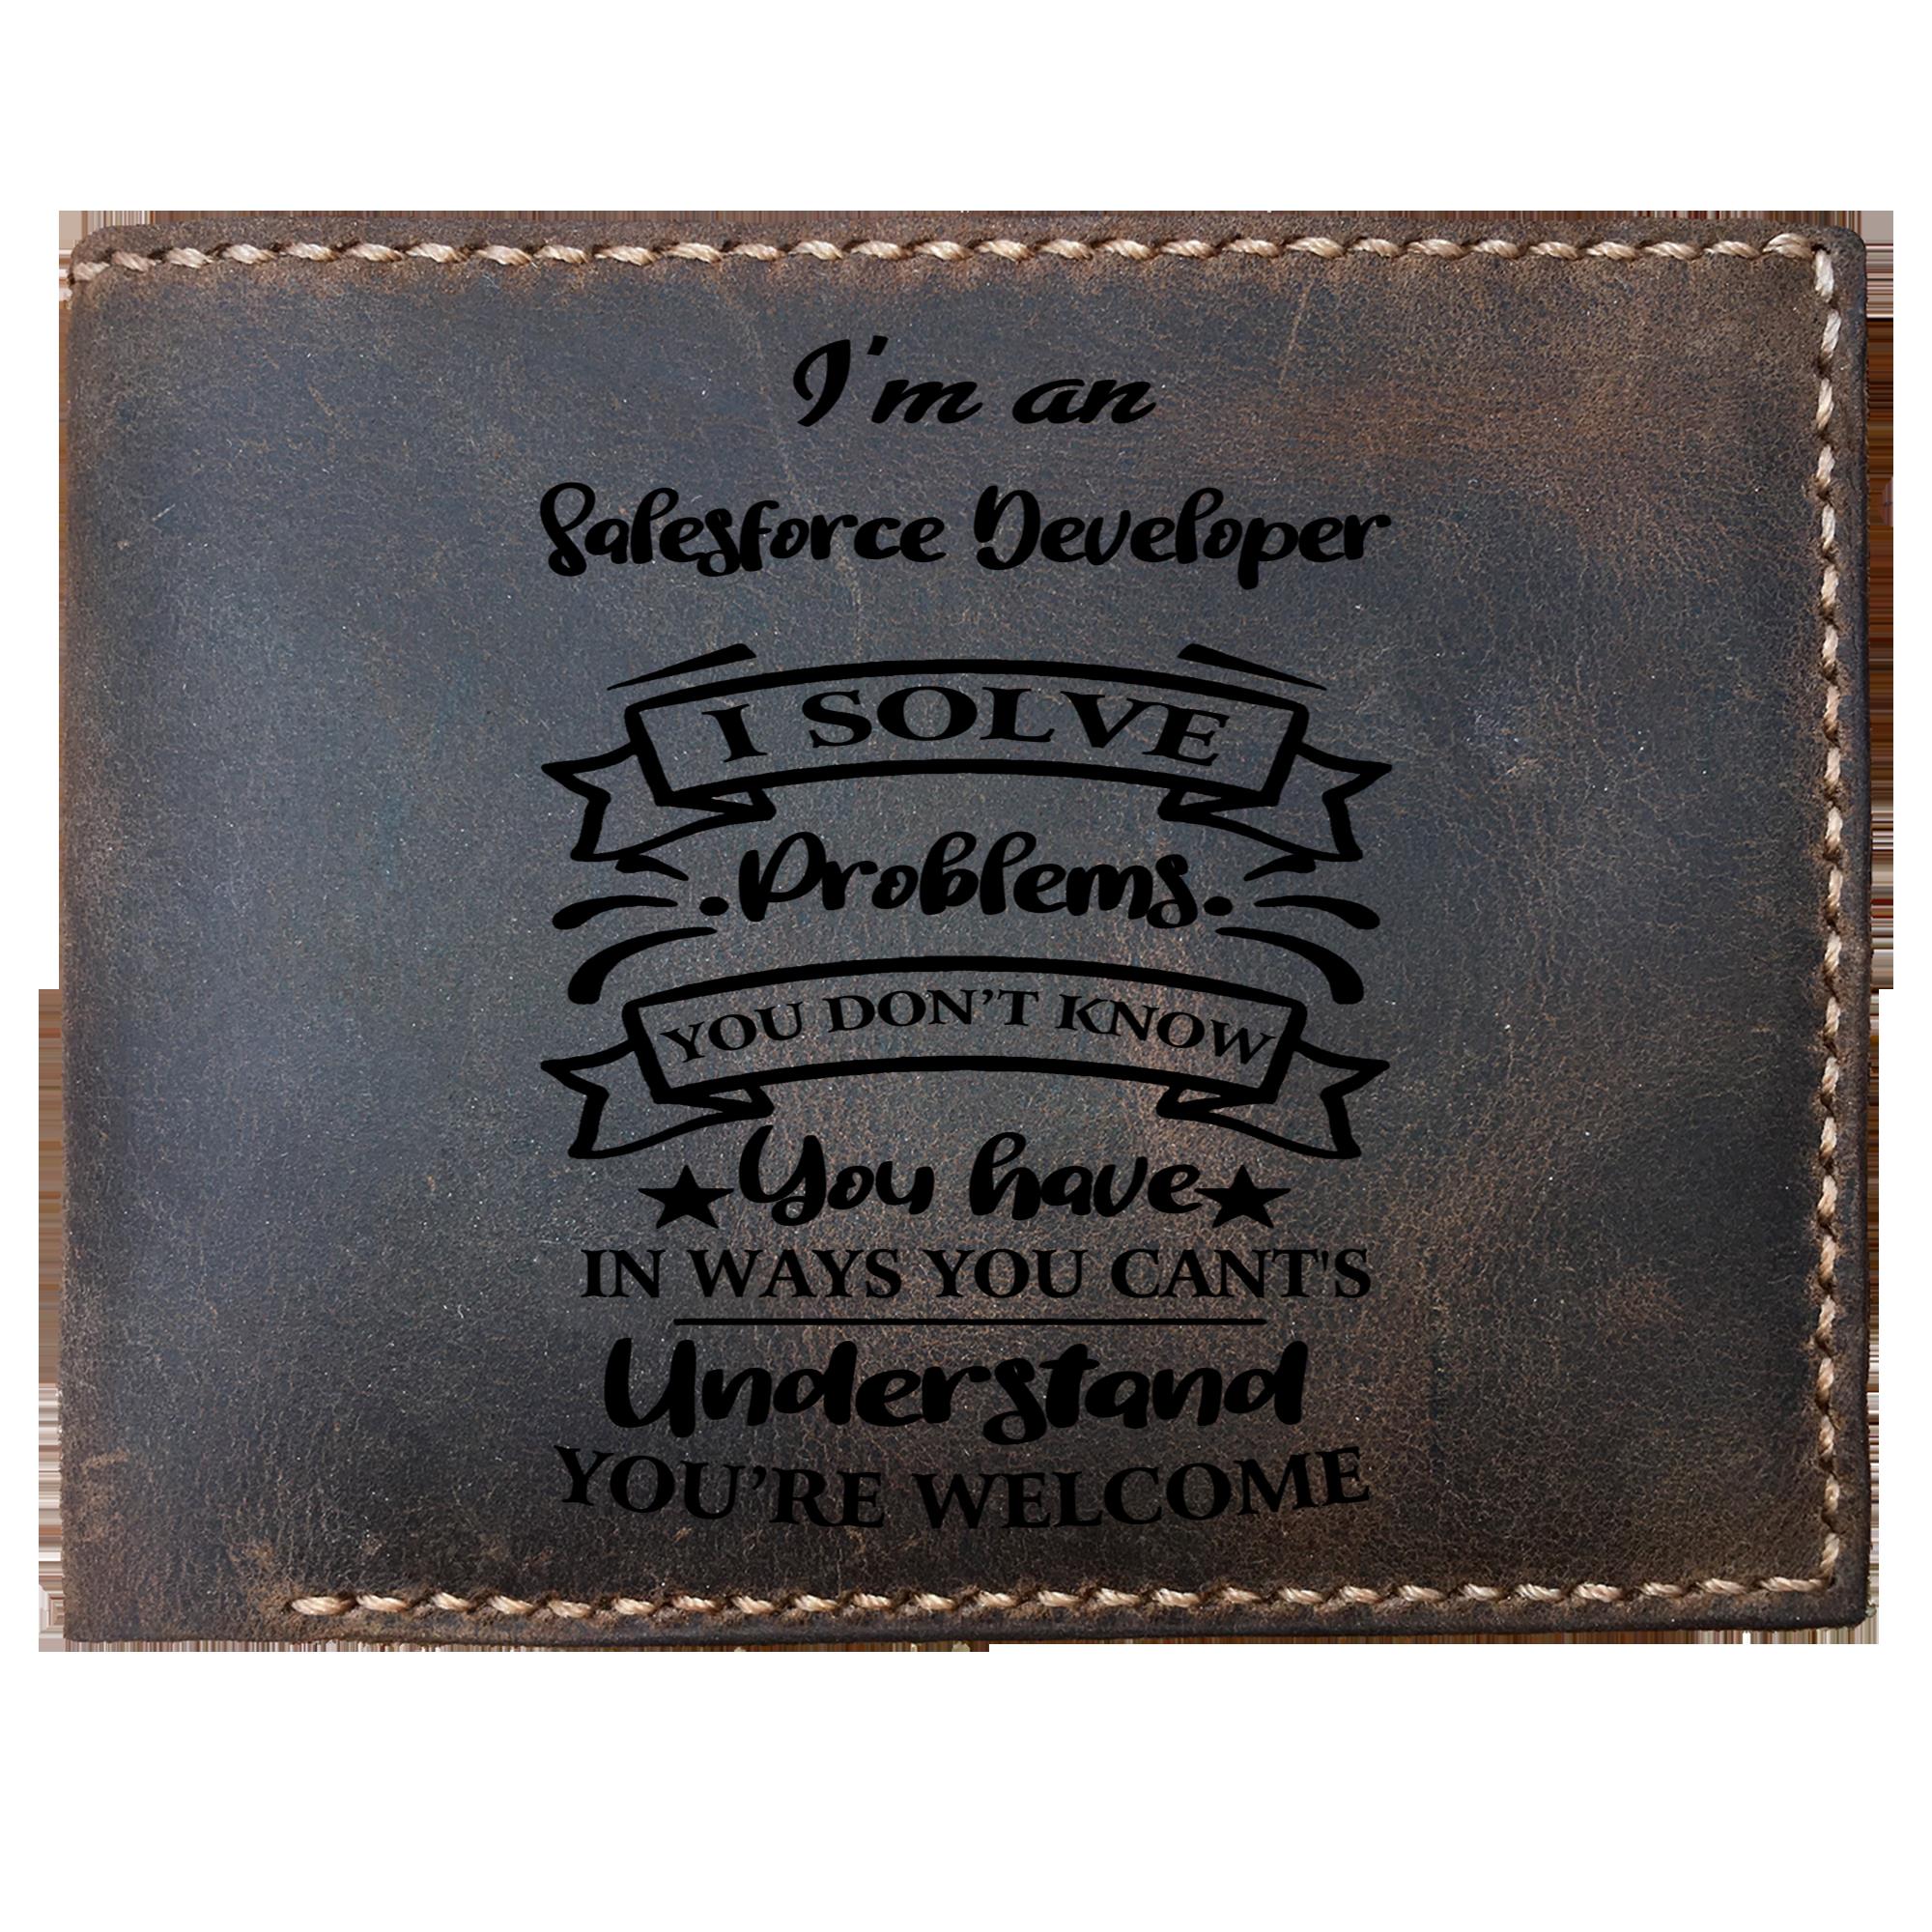 Skitongifts Funny Custom Laser Engraved Bifold Leather Wallet For Men, I'm an Salesforce Developer Solve Problems, Father's Day Gifts